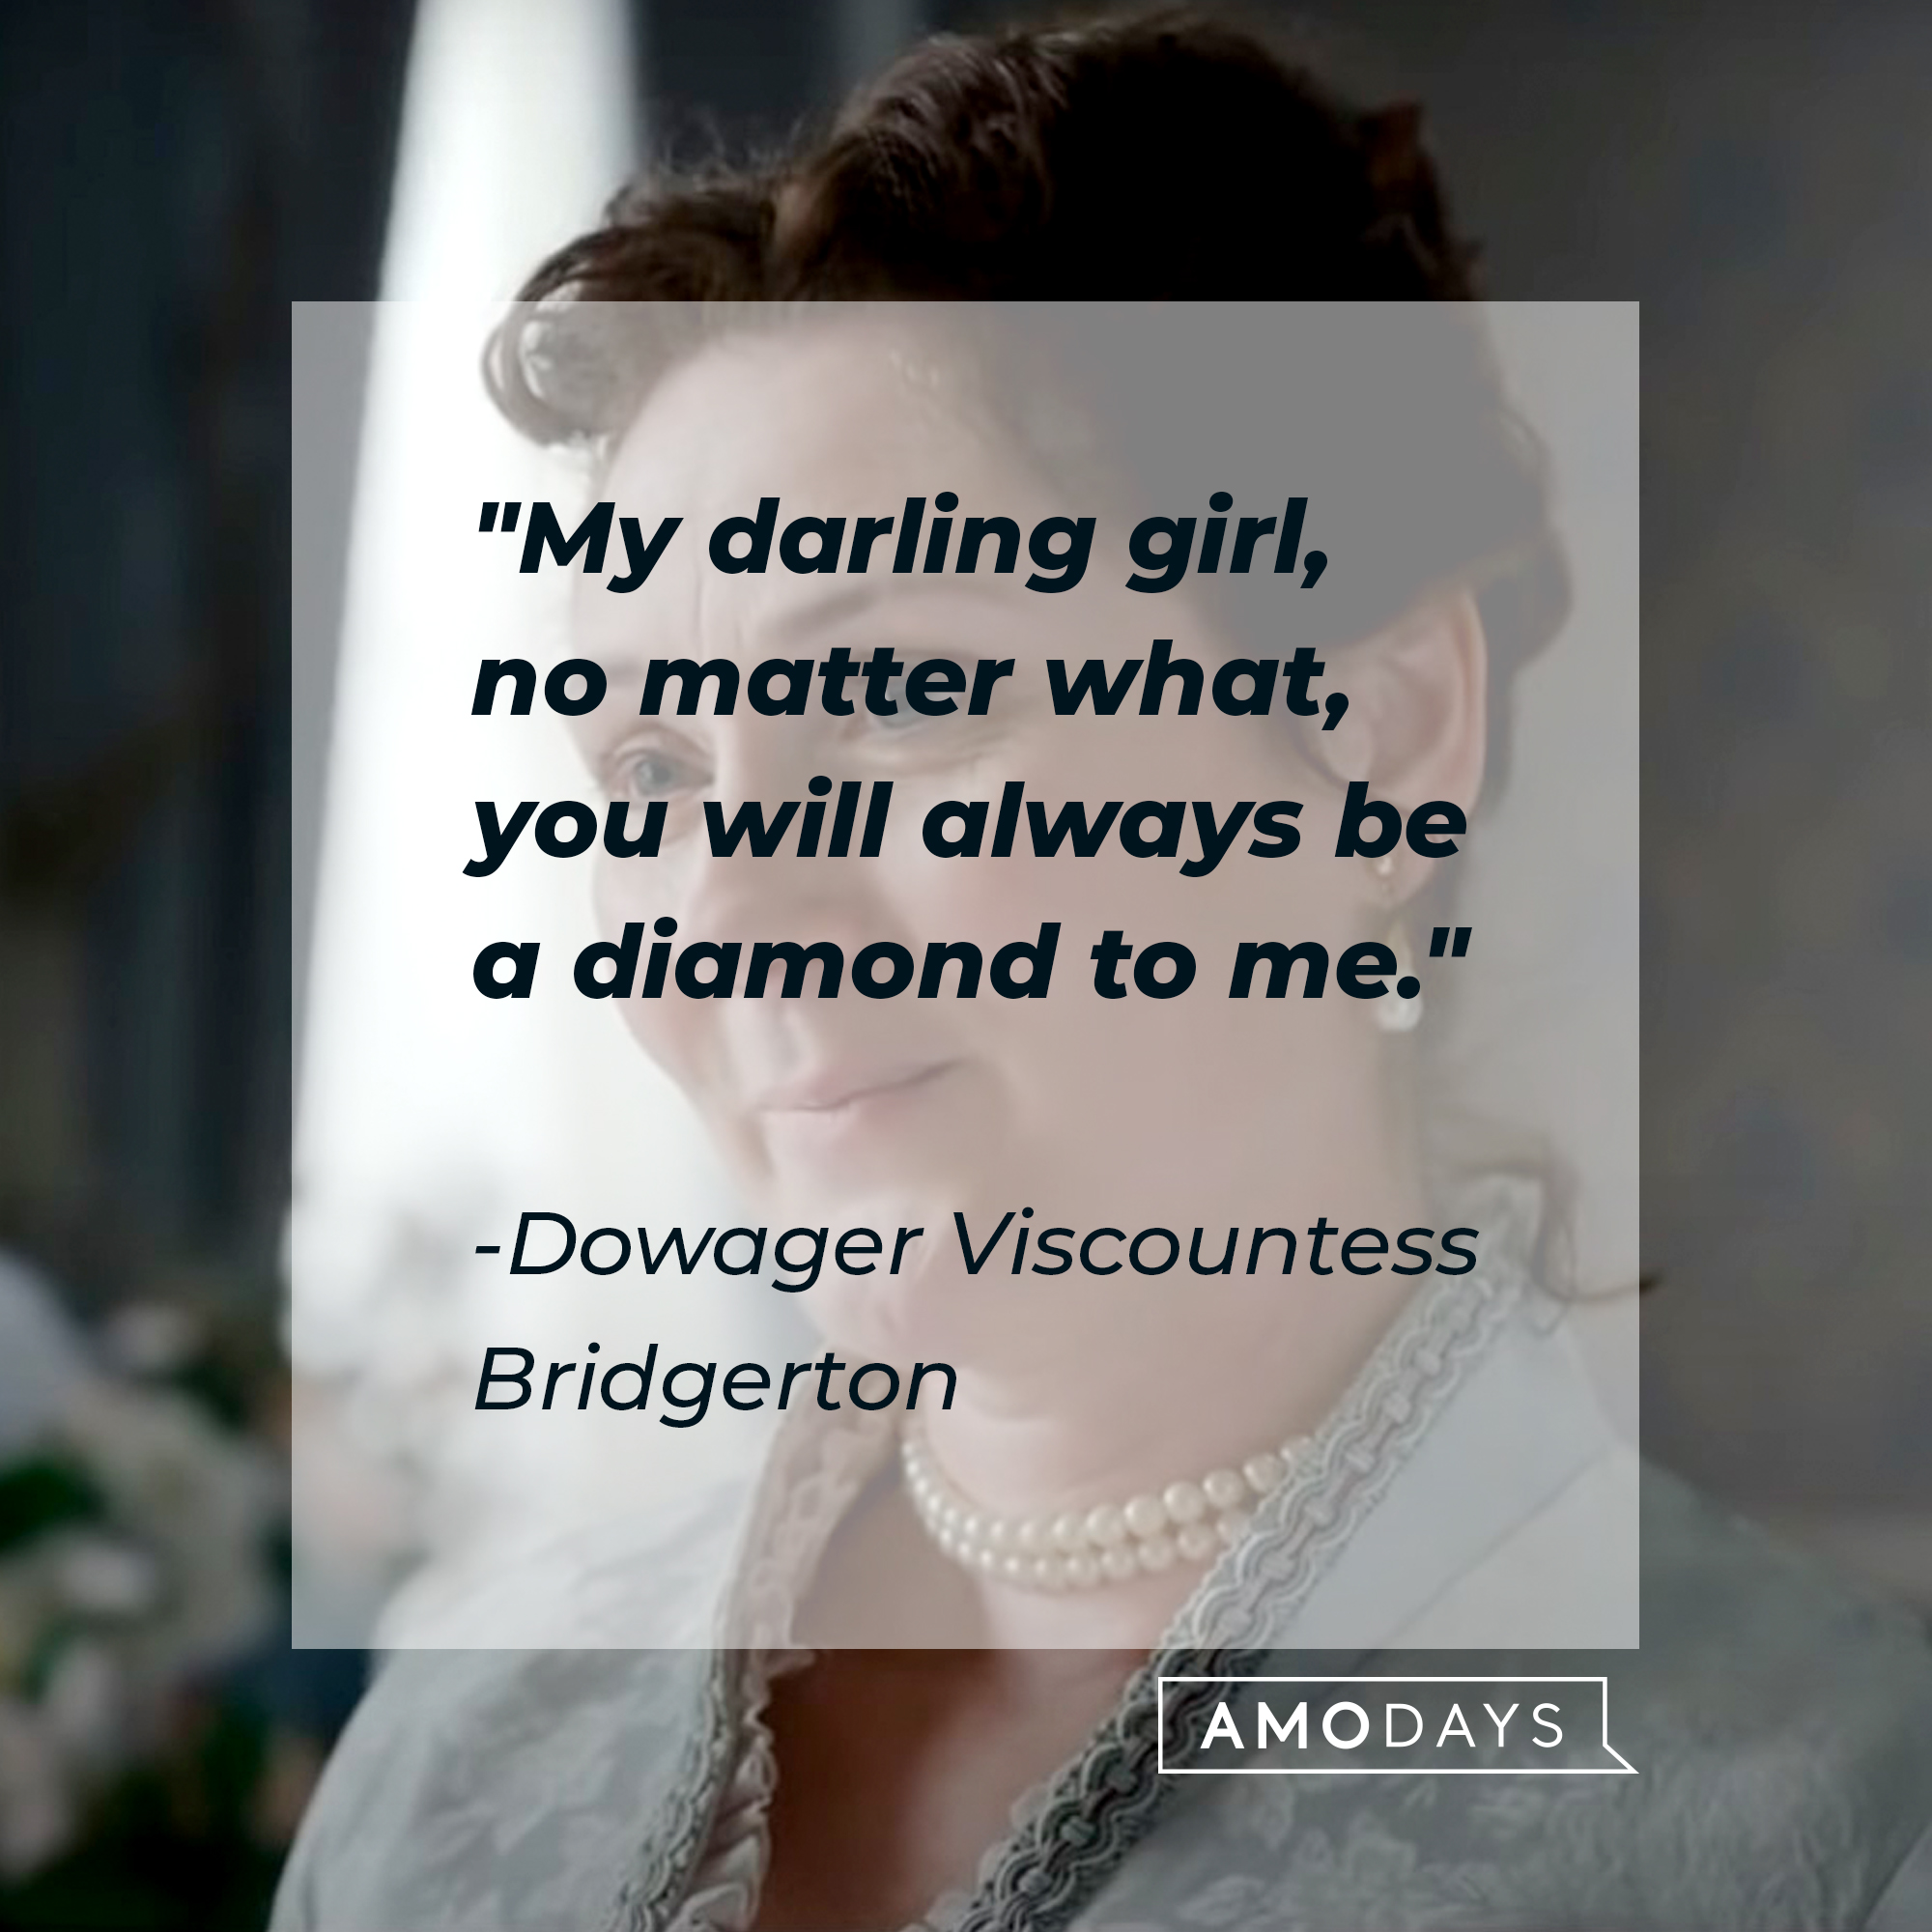 An image of Dowager Viscountess Bridgerton  with her quote: "My darling girl, no matter what, you will always be a diamond to me." │Source: youtube.com/Netflix